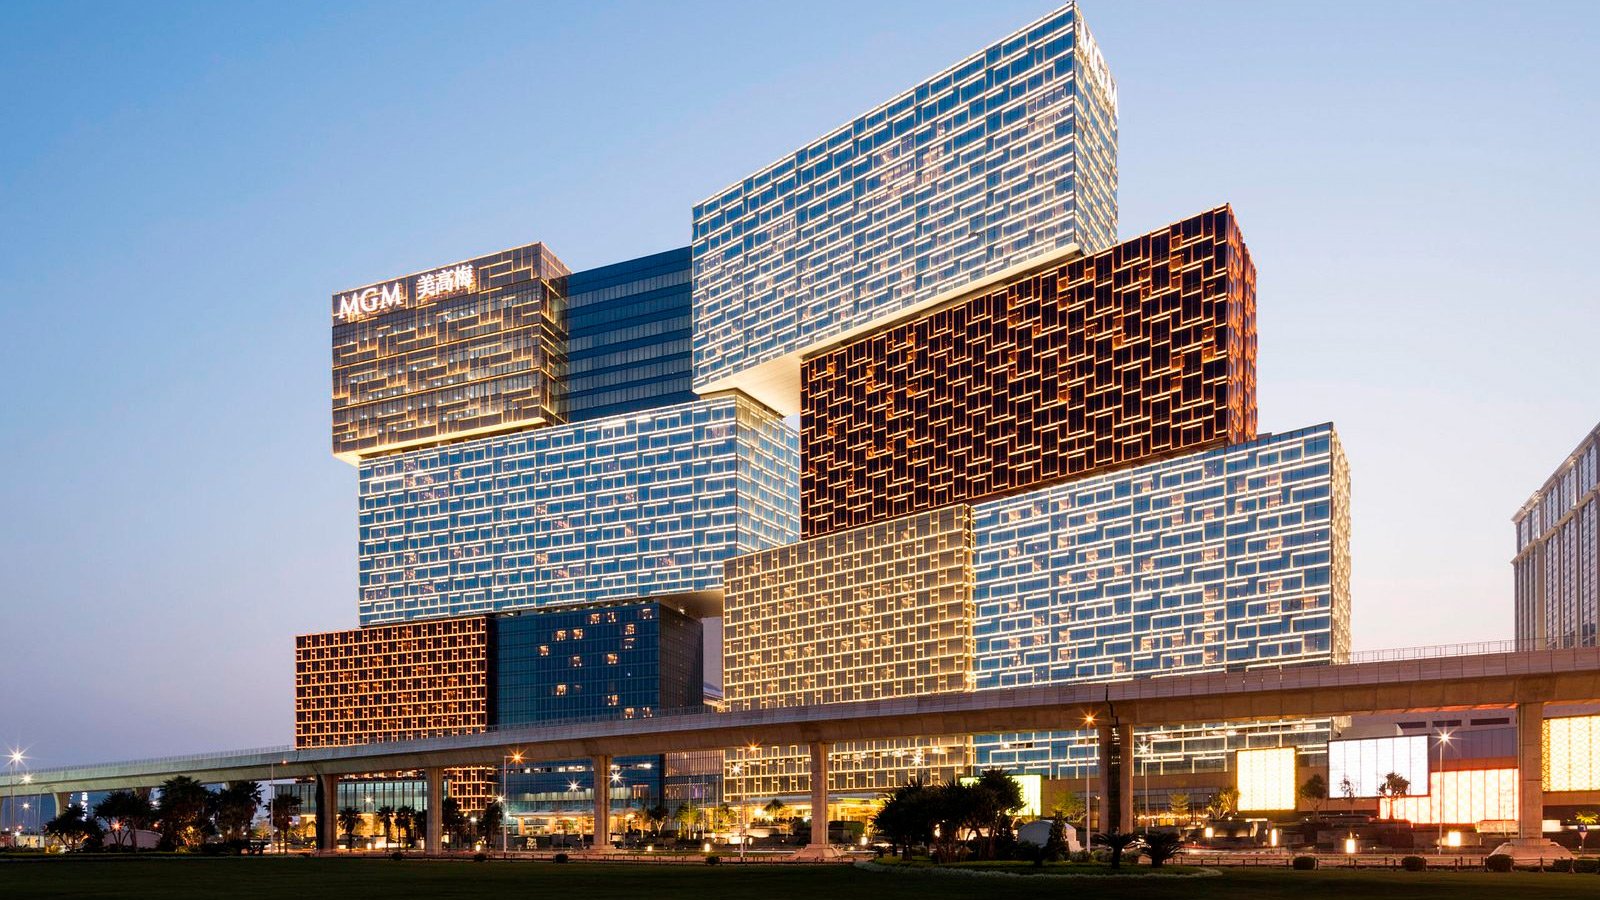 MGM Macau properties to undergo renovations with a focus on non-gaming offerings